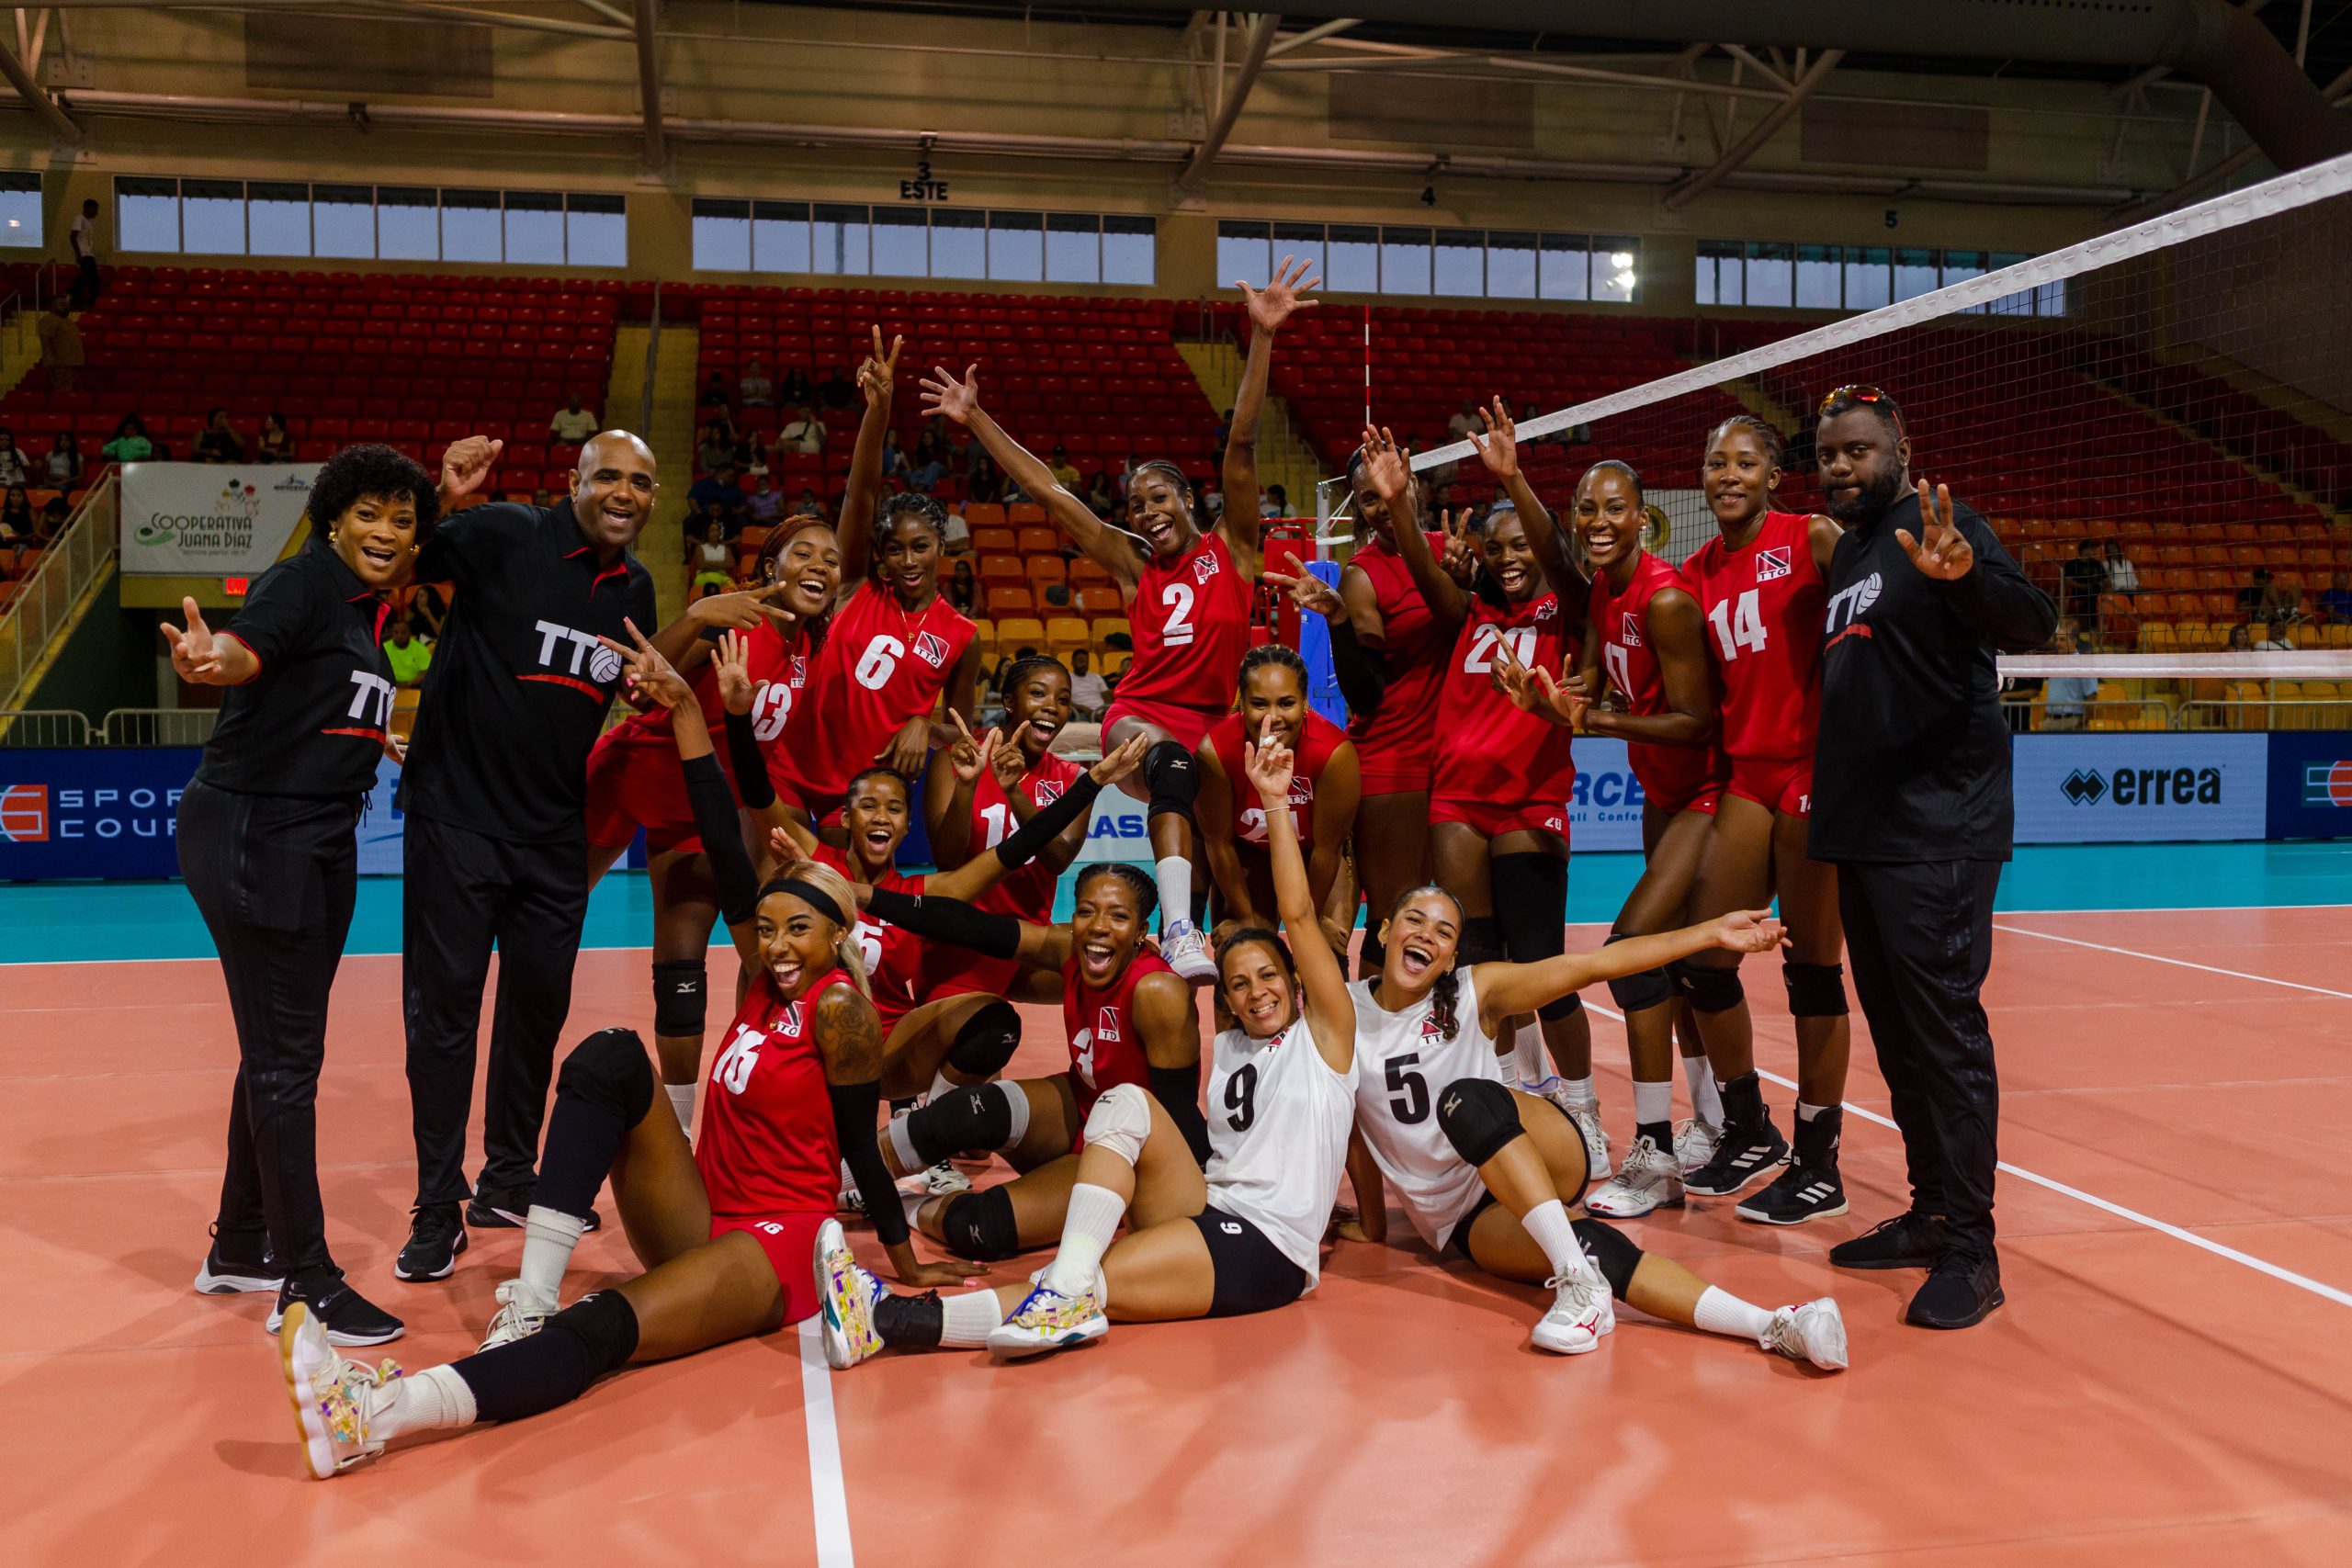 Trinidad and Tobago wins the bronze medal in straight sets